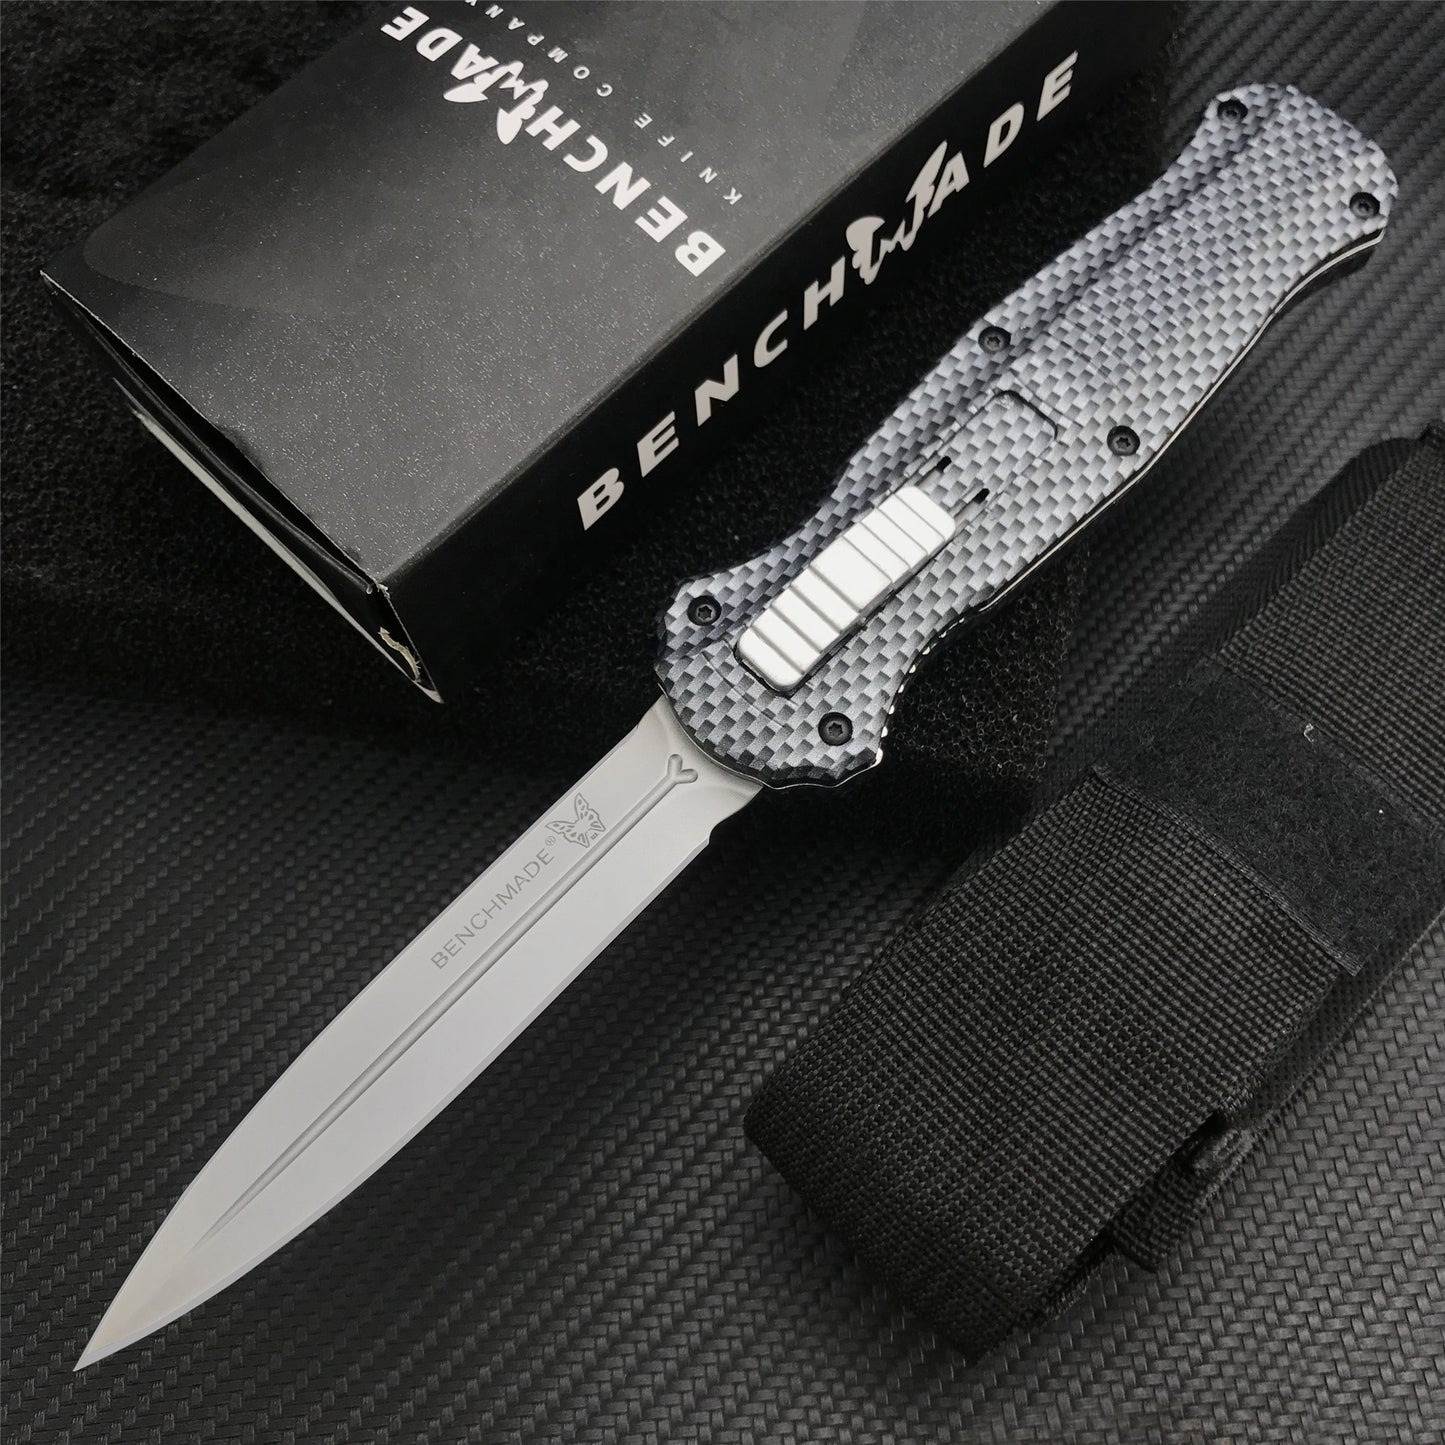 Benchmade 3300bk dagger Tactical Knives AUTO EDC Spring Assist Knife Fixed Blades Double Edge Survival Knifes Camping Hunting Cutting Knifes Fast Opening